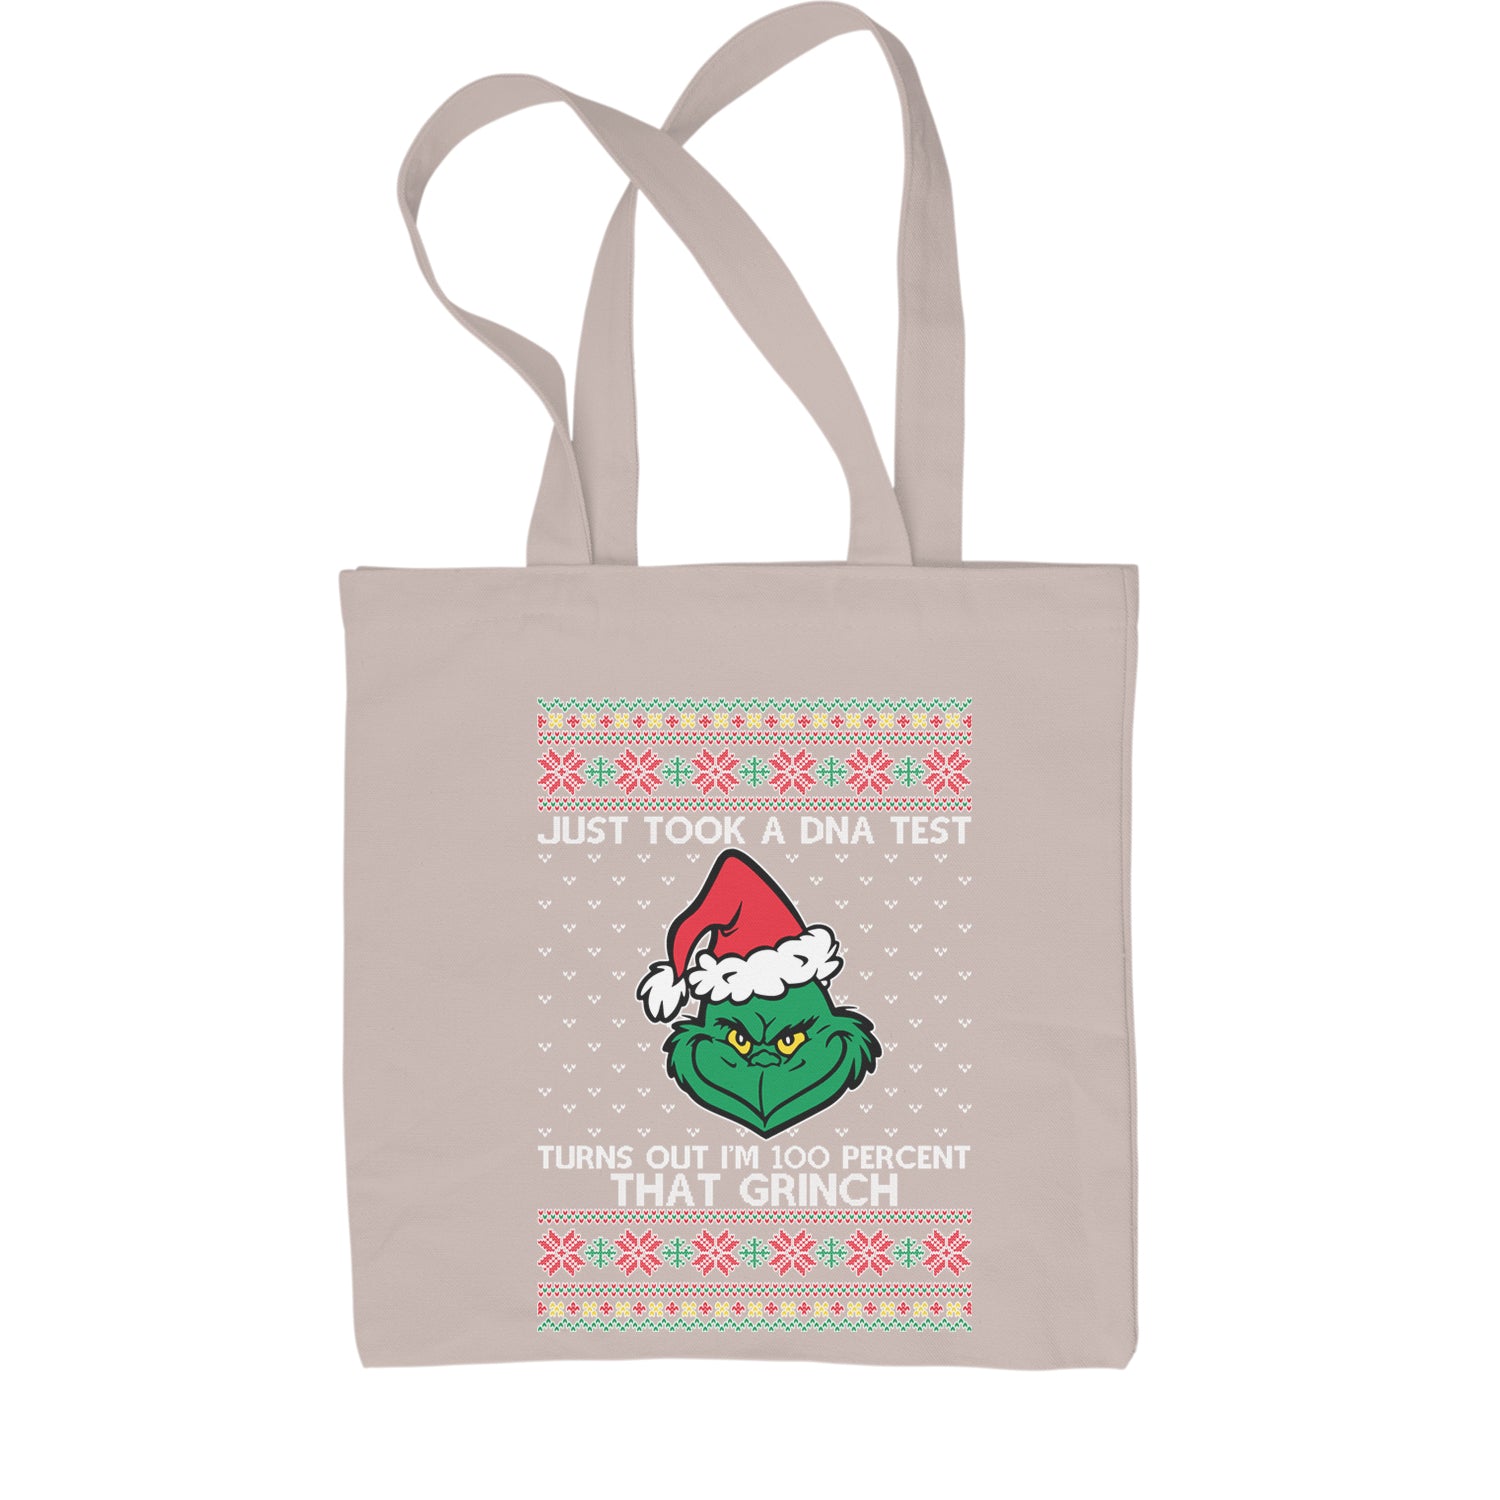 One Hundred Percent That Grinch Shopping Tote Bag christmas, grinch, sweater, sweatshirt, ugly, xmas by Expression Tees